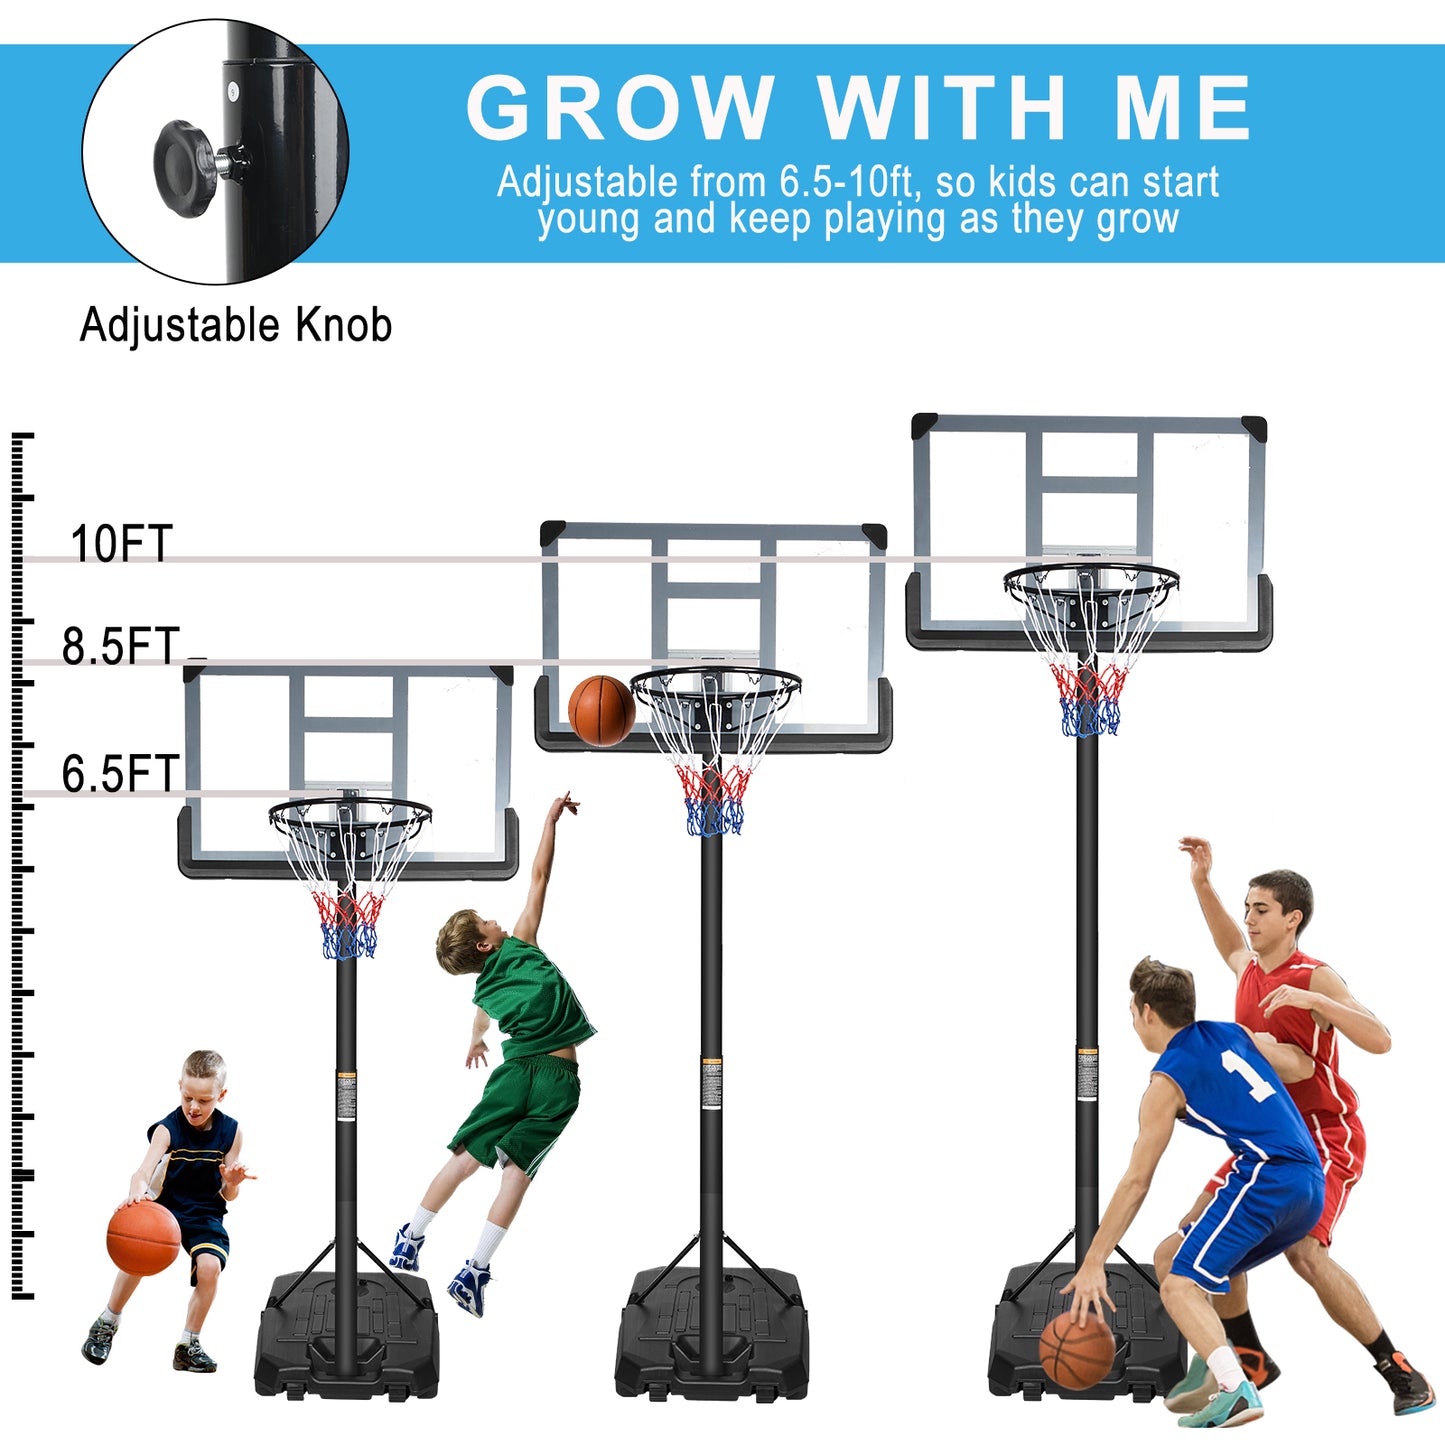 Portable Basketball Hoop Backboard System Stand Height Adjustable 6.6ft - 10ft with 42 Inch Backboard and Wheels for Adults Teens Outdoor Indoor Basketball Goal Game Play Set